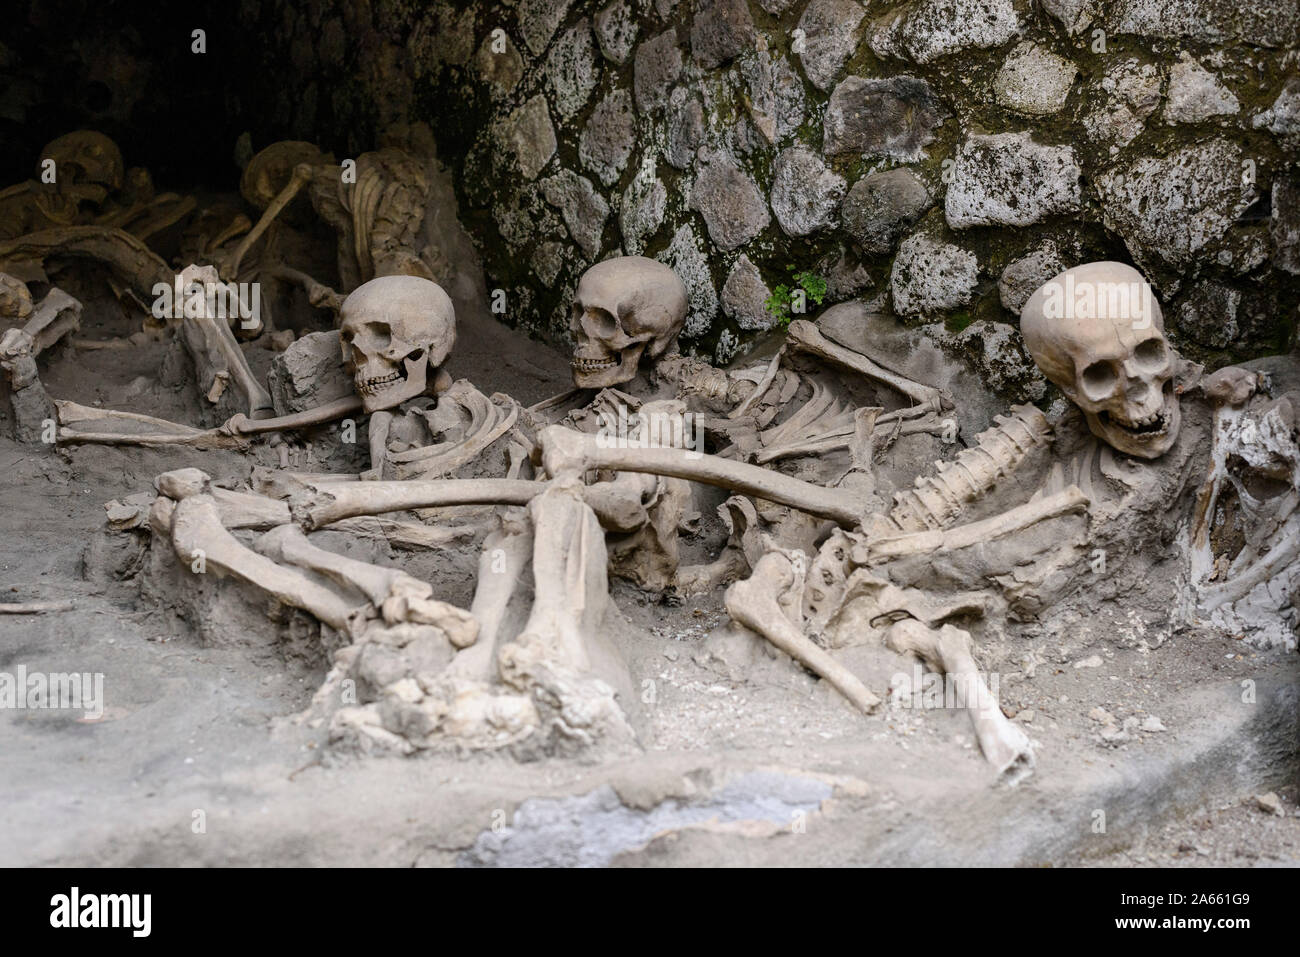 Ercolano. Italy. Archaeological site of Herculaneum. Casts of skeletons found in the boat houses on the ancient shoreline. Stock Photo